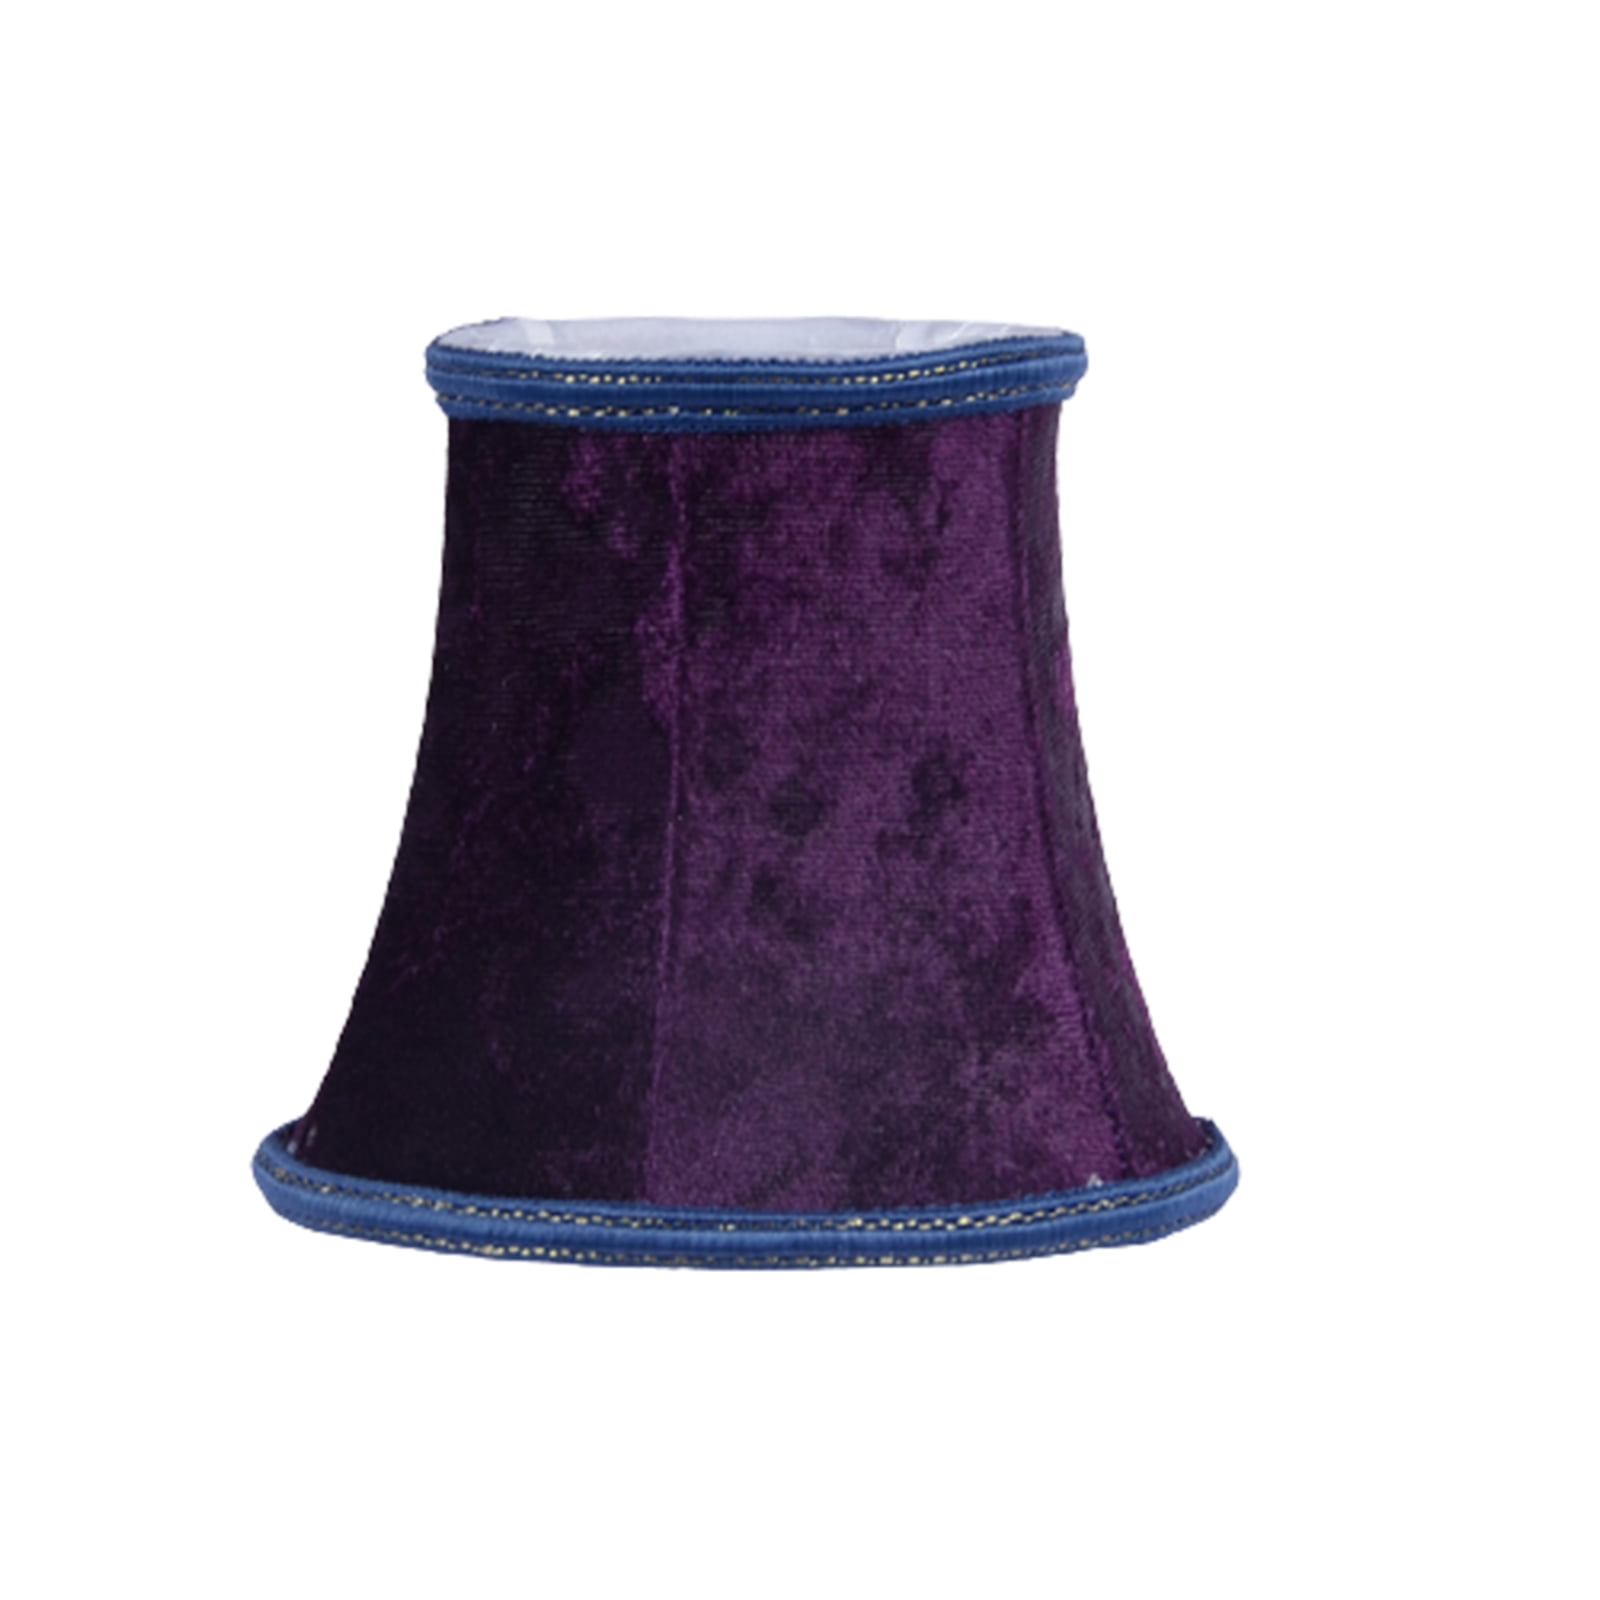 Purple Lampshades Floor Lamp Shade Light Cover 4.2x7.9x7 Inch 